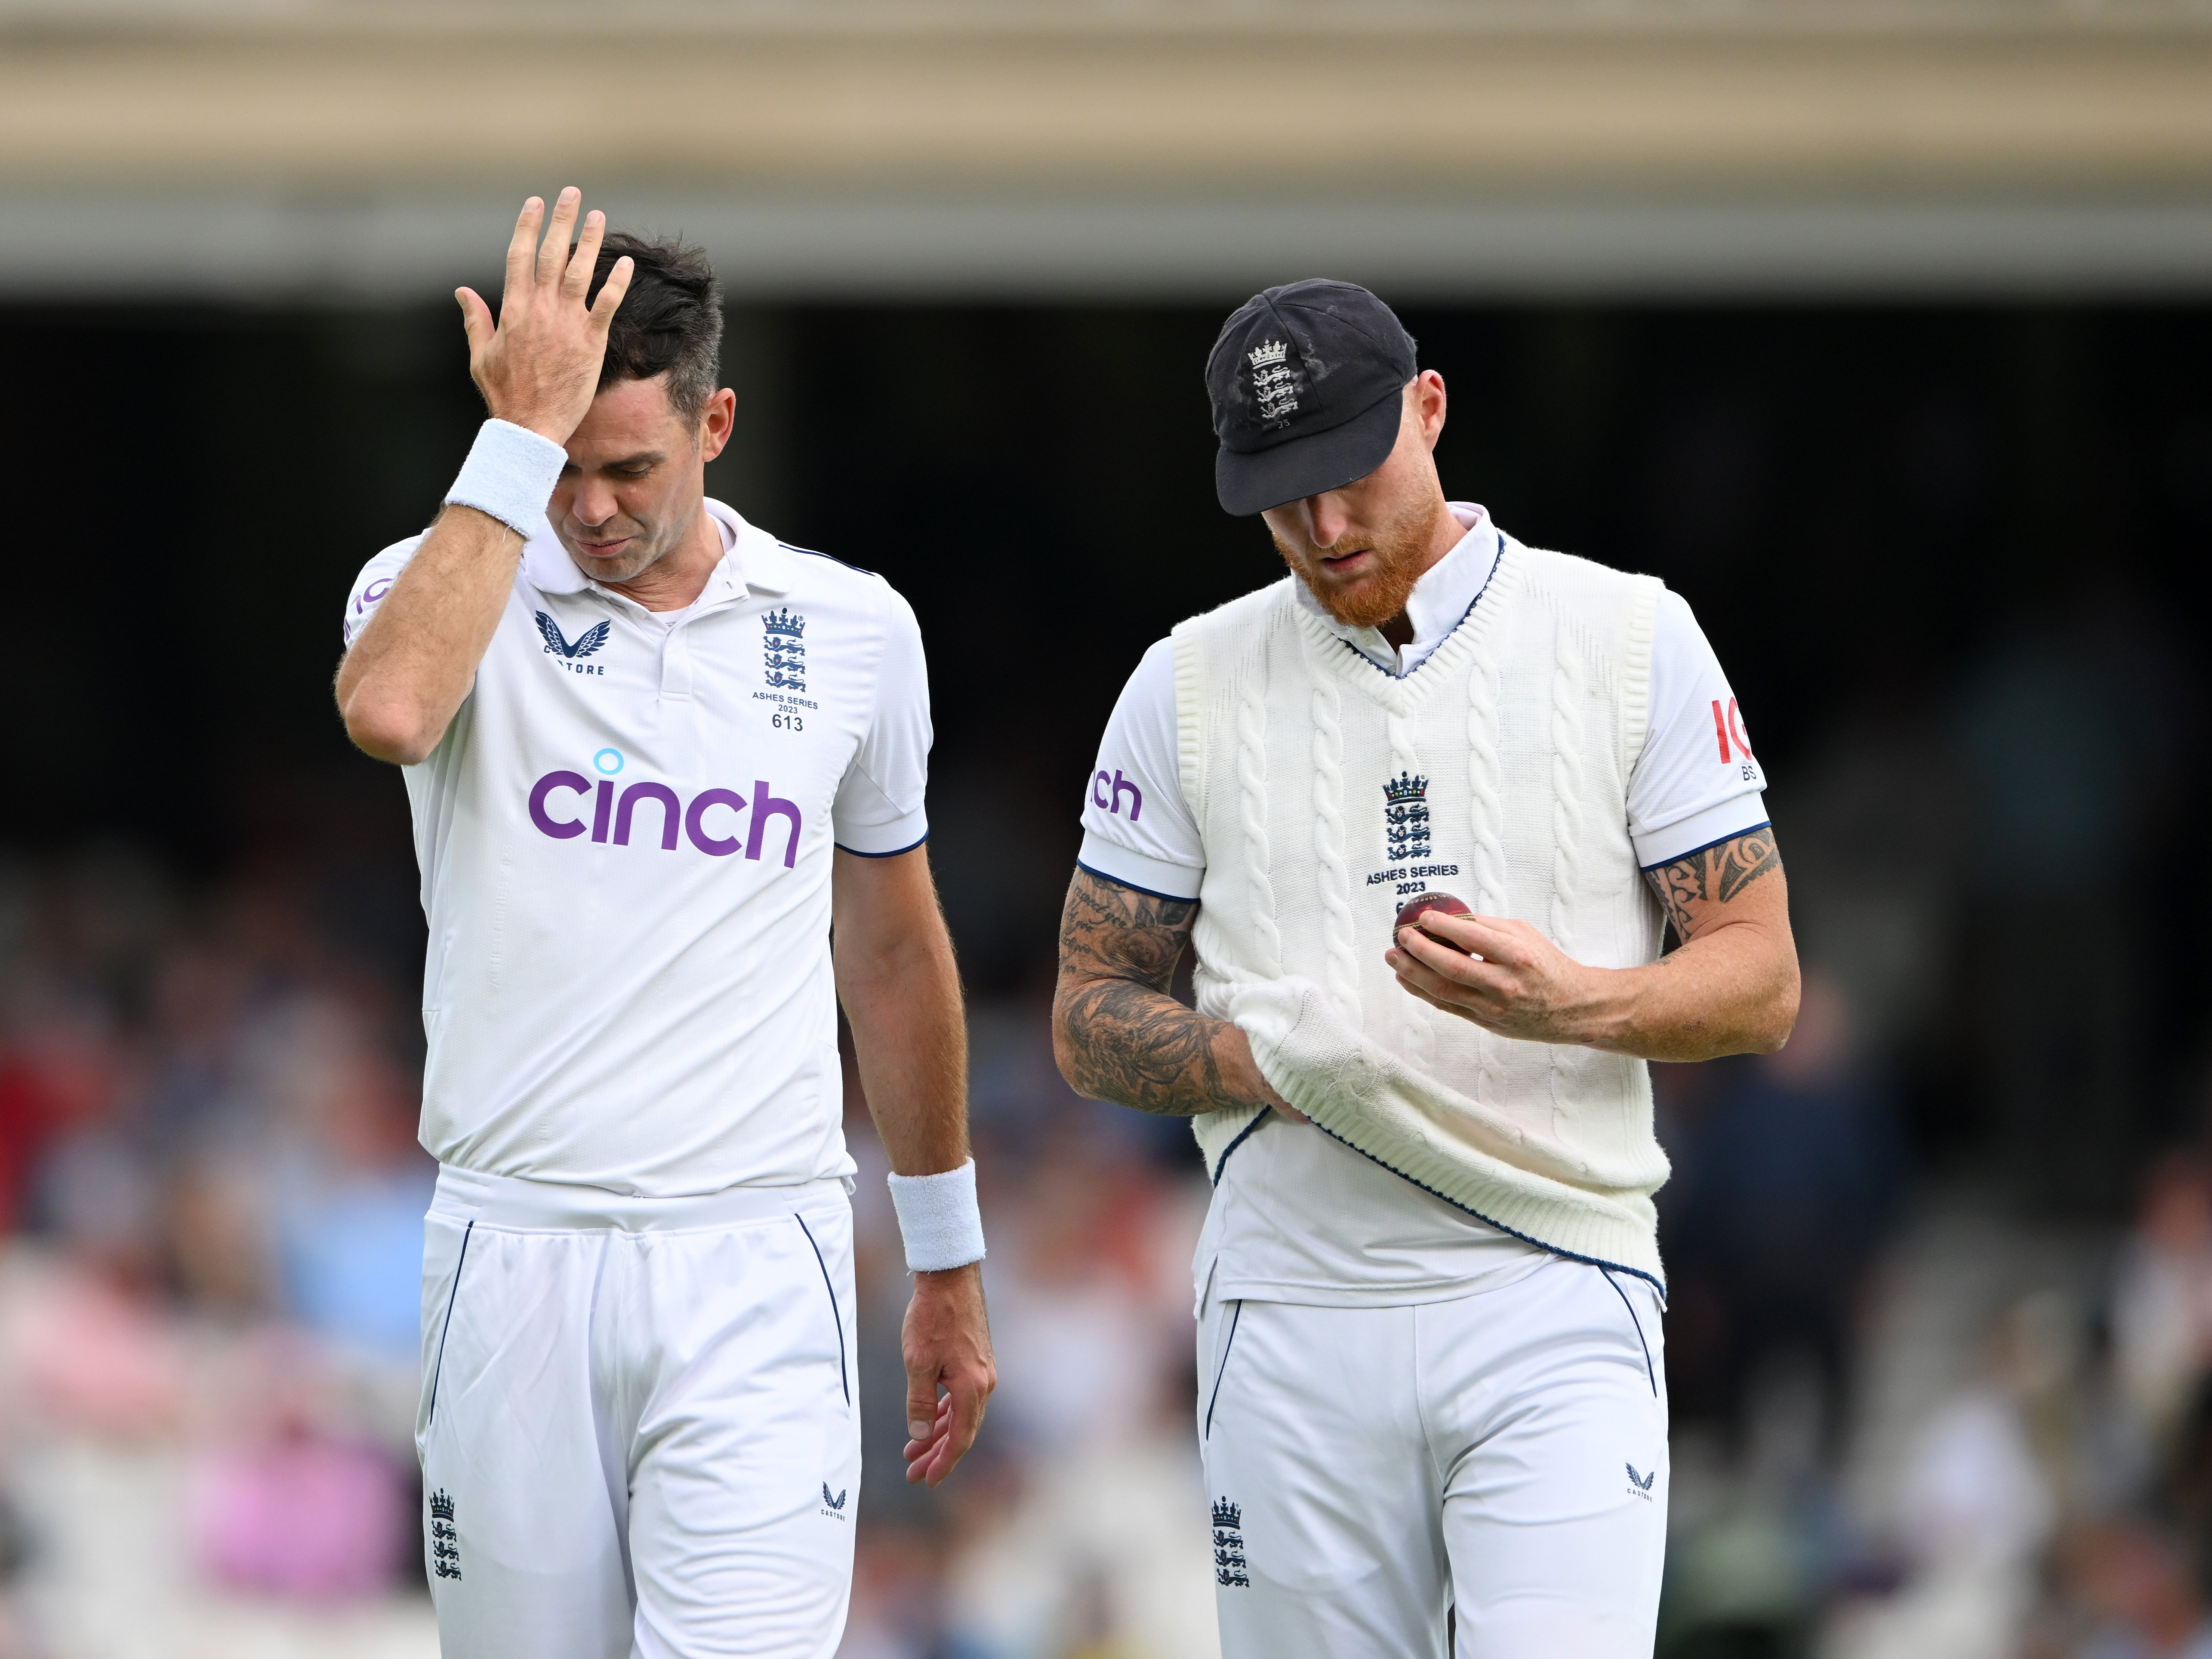 Ben Stokes’s England struggled on day one at the Oval